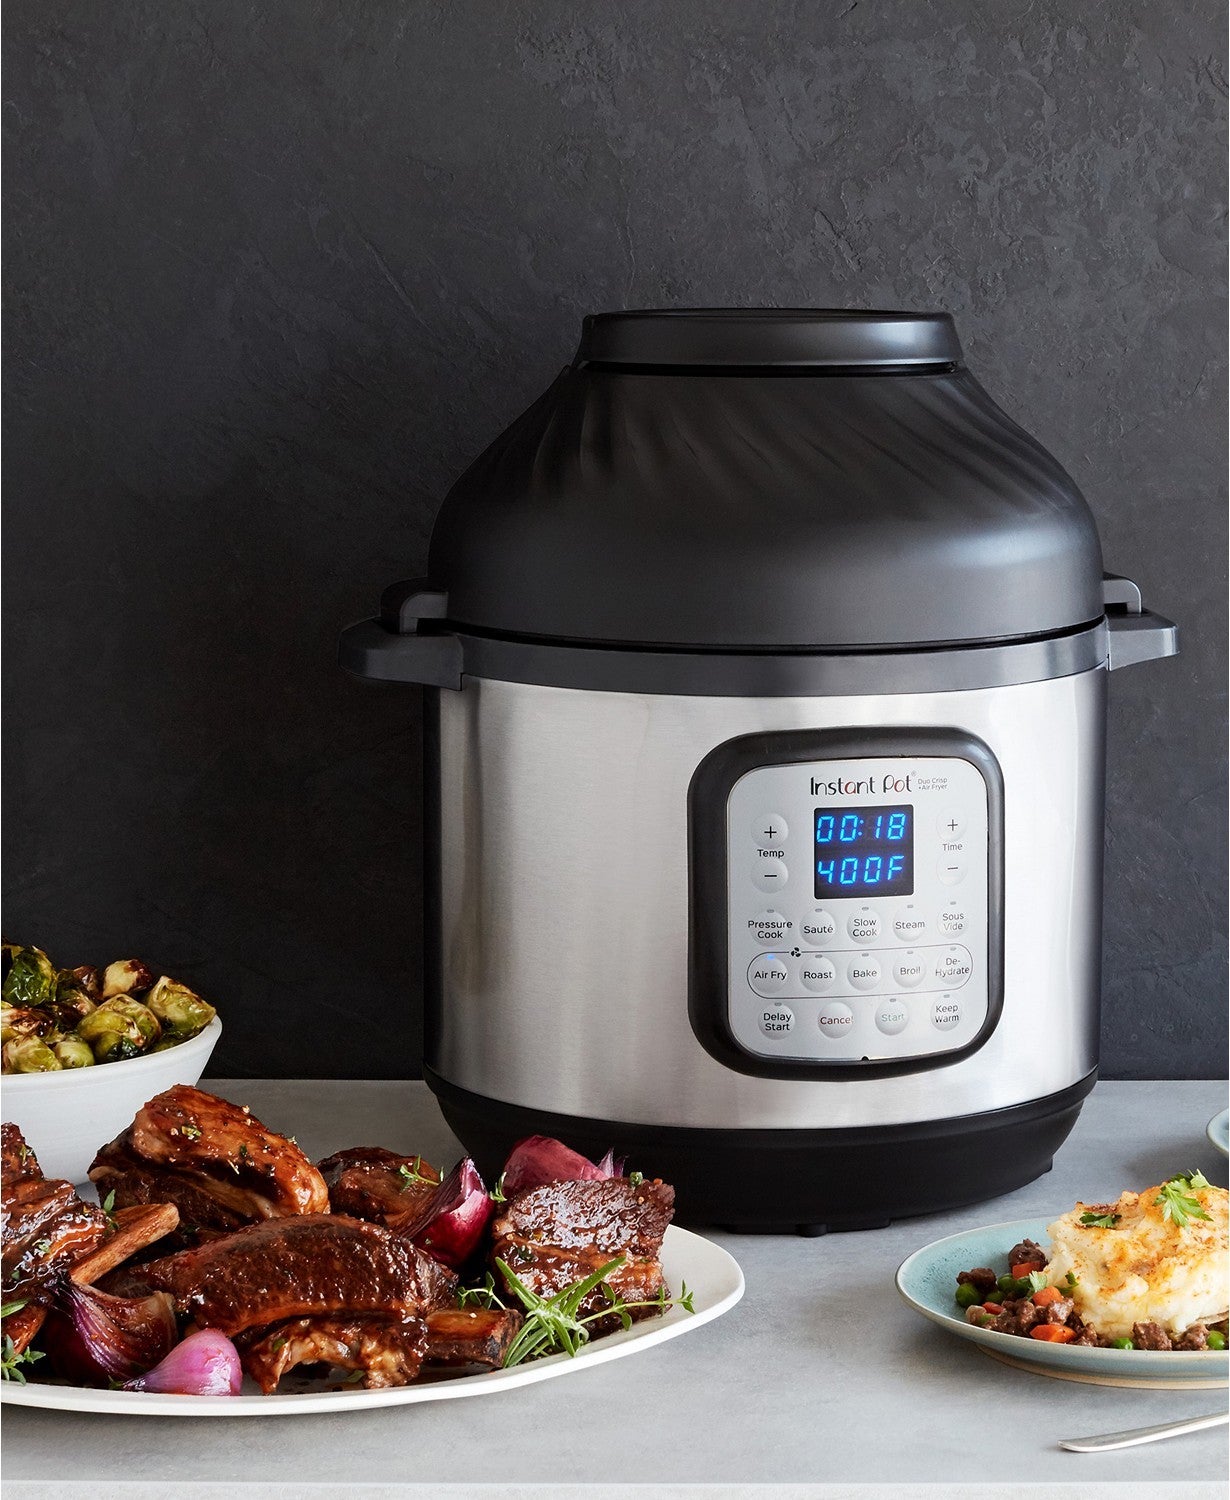 Best Instant Pot Black Friday Deals 2019 - Black Friday and Cyber